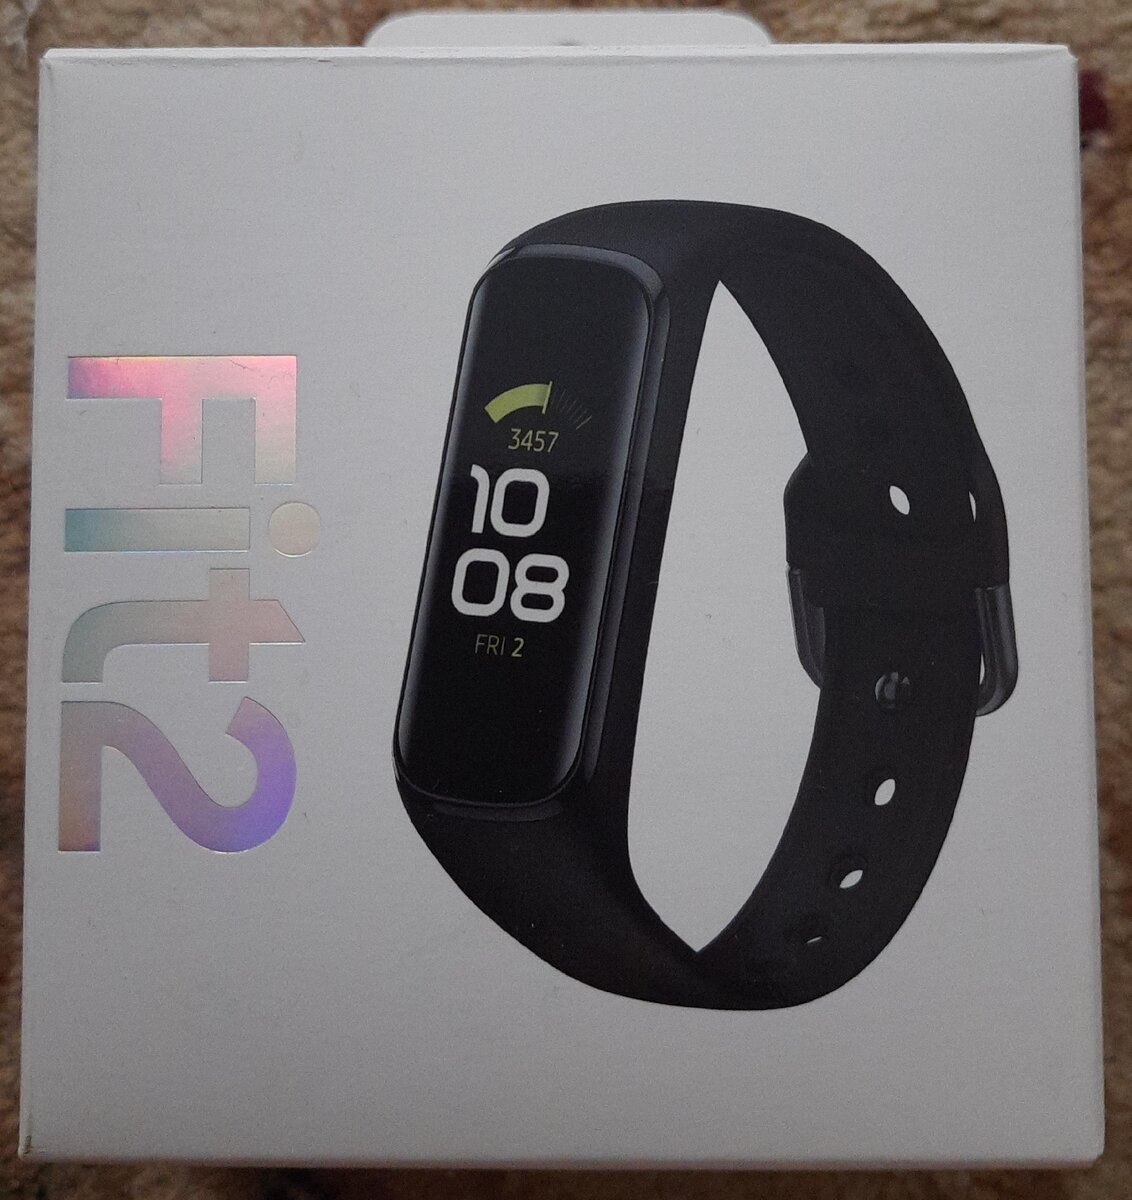 Samsung galaxy fit 3 pink. Samsung Galaxy Fit 2. Смарт-часы Samsung Galaxy fit3. Смарт-часы Samsung Galaxy Fit 3 Silver. Самсунг галакси Fit 4.